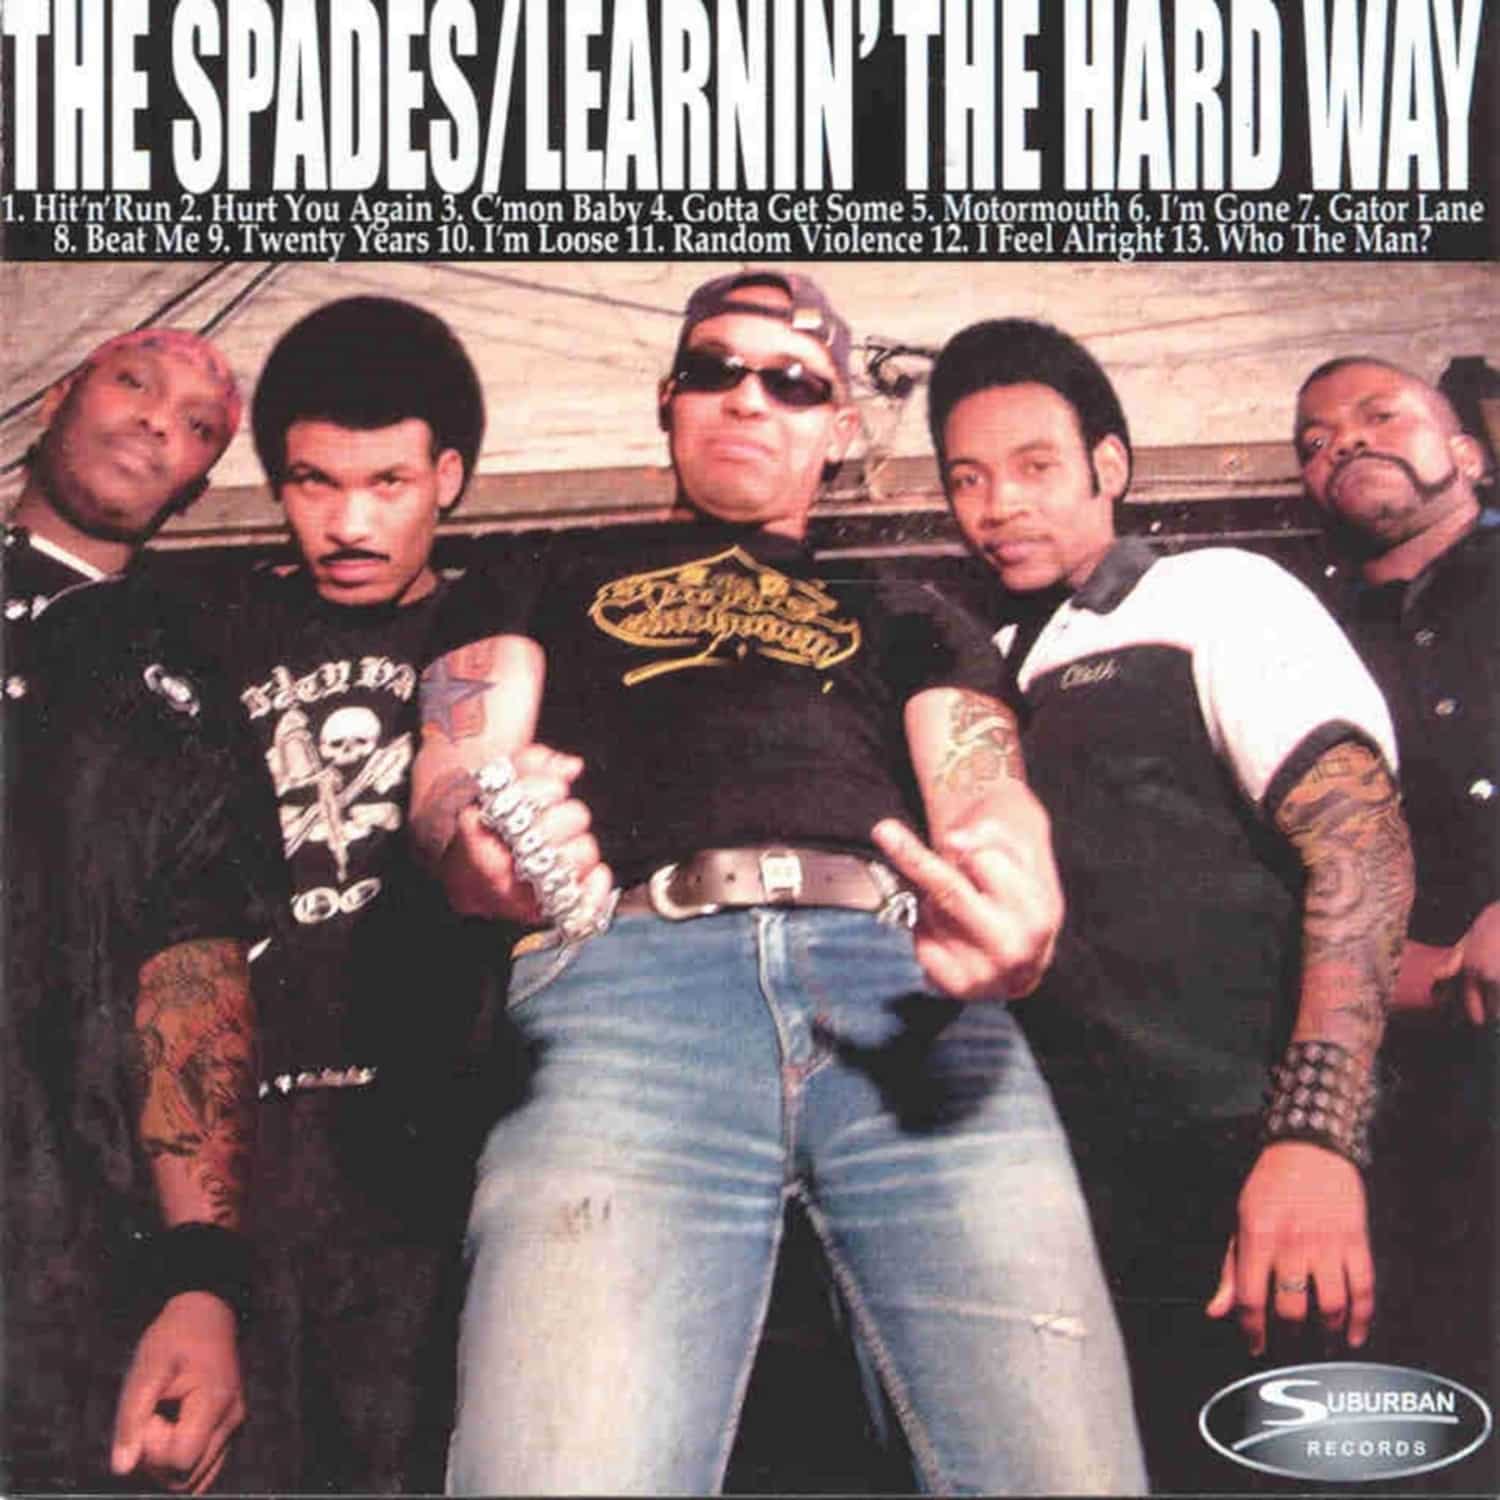 Spades - LEARING THE HARD WAY...NOT TO FUCK WITH THE SPADES 